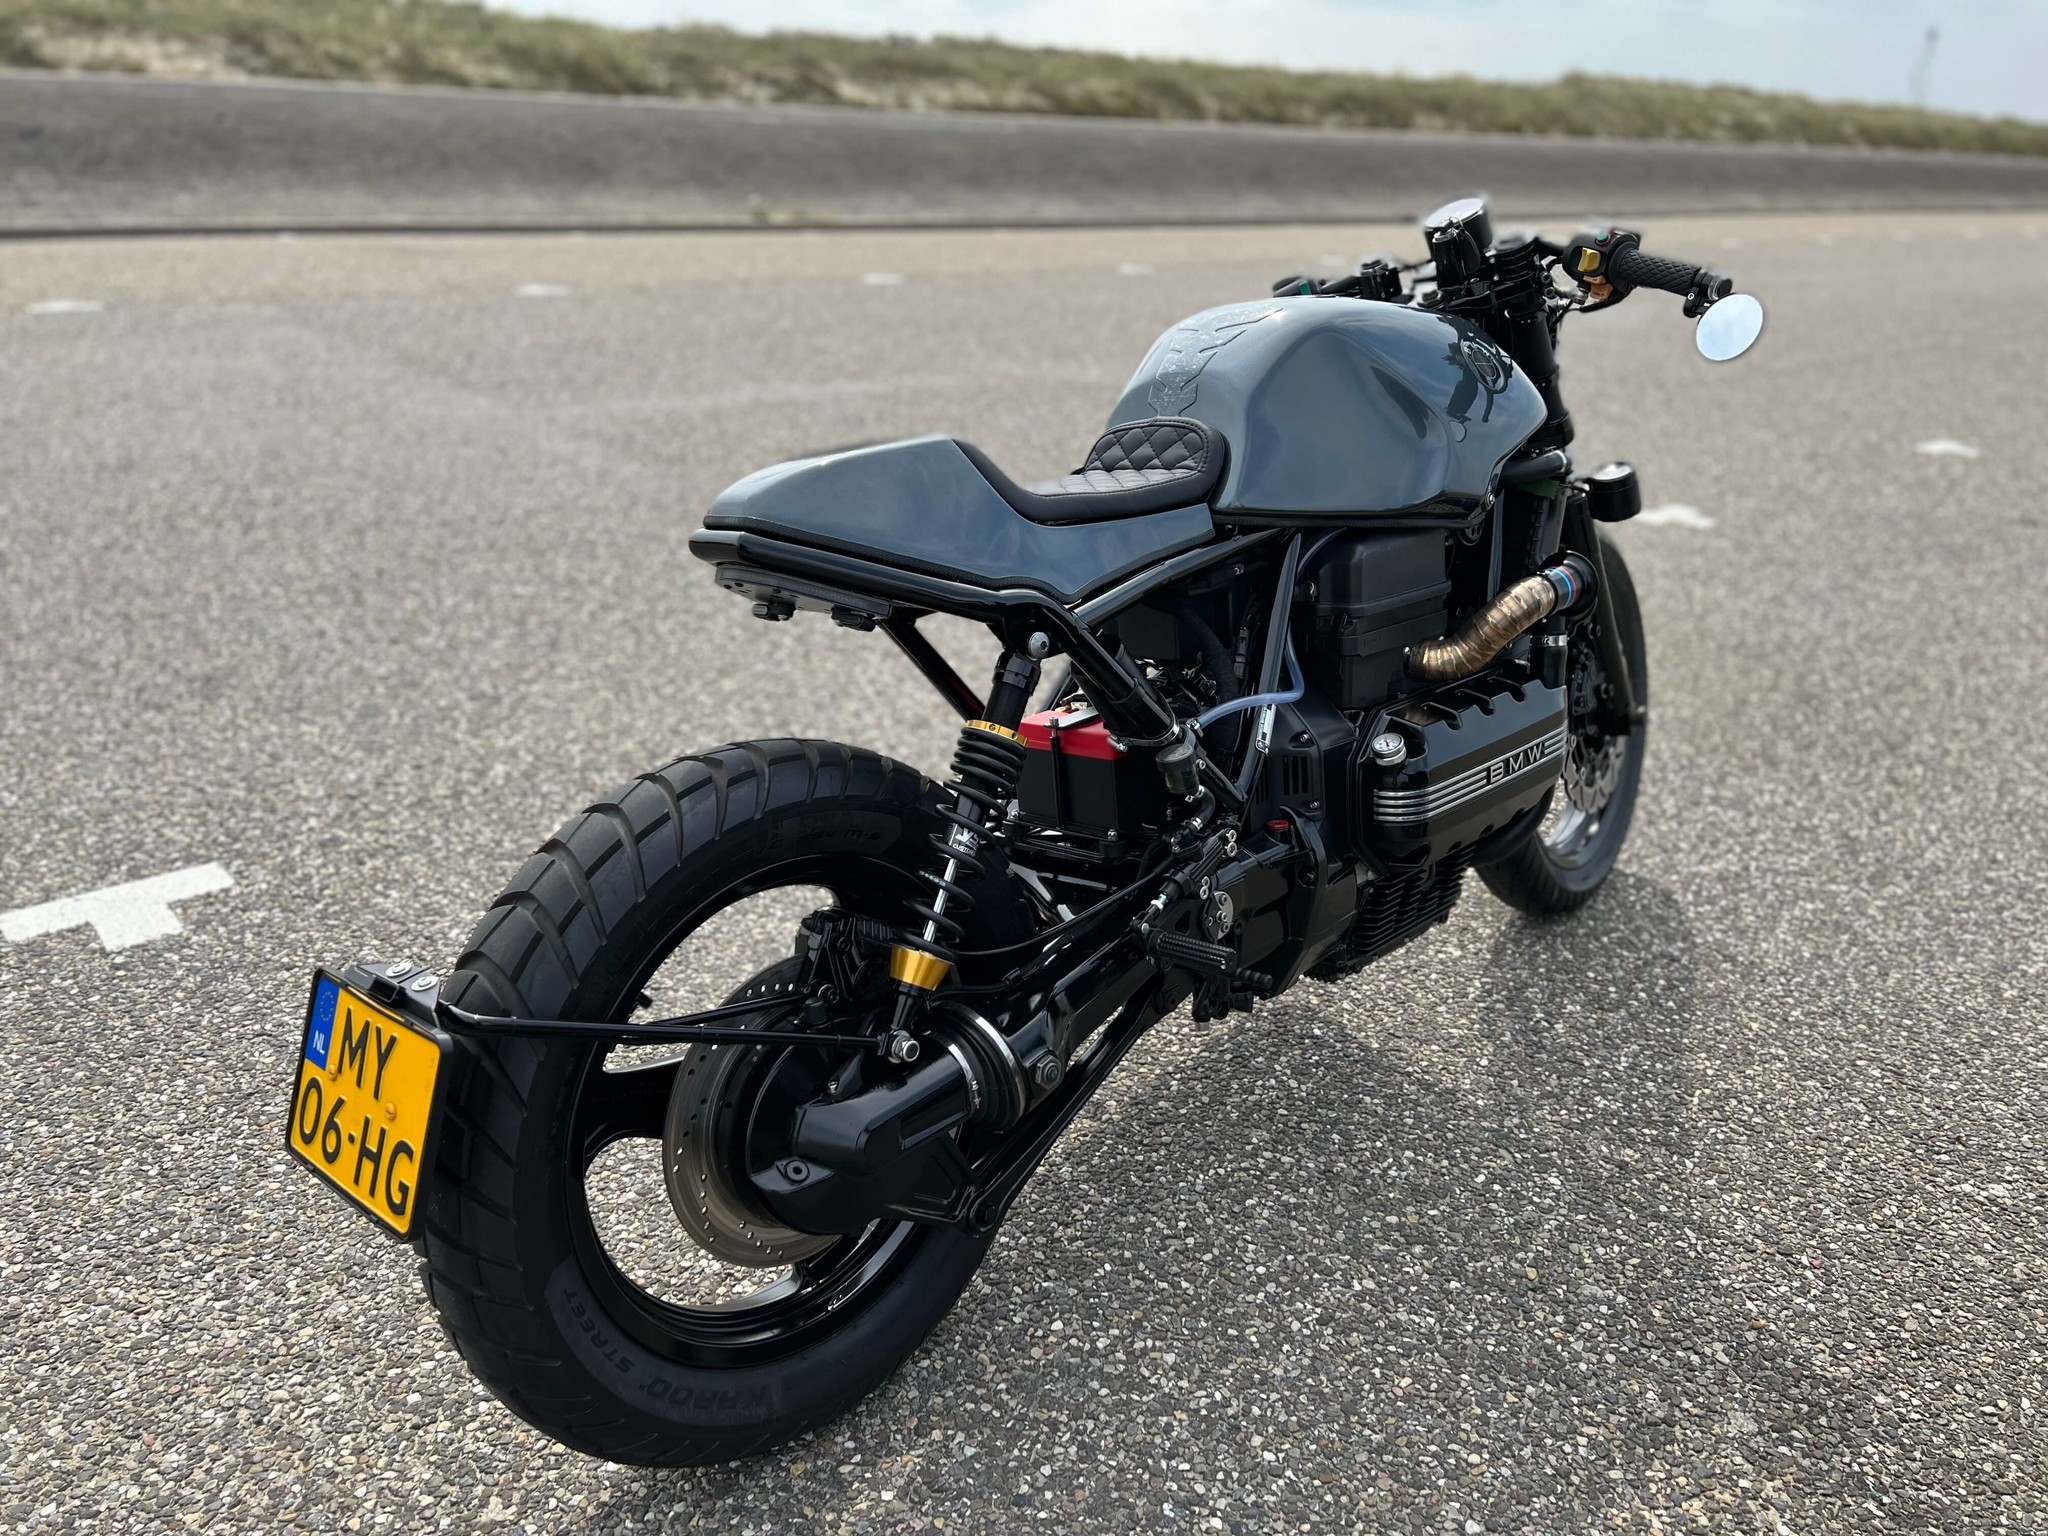 Bmw K1100 - The Story Behind The Bike - Caferacerwebshop.Com